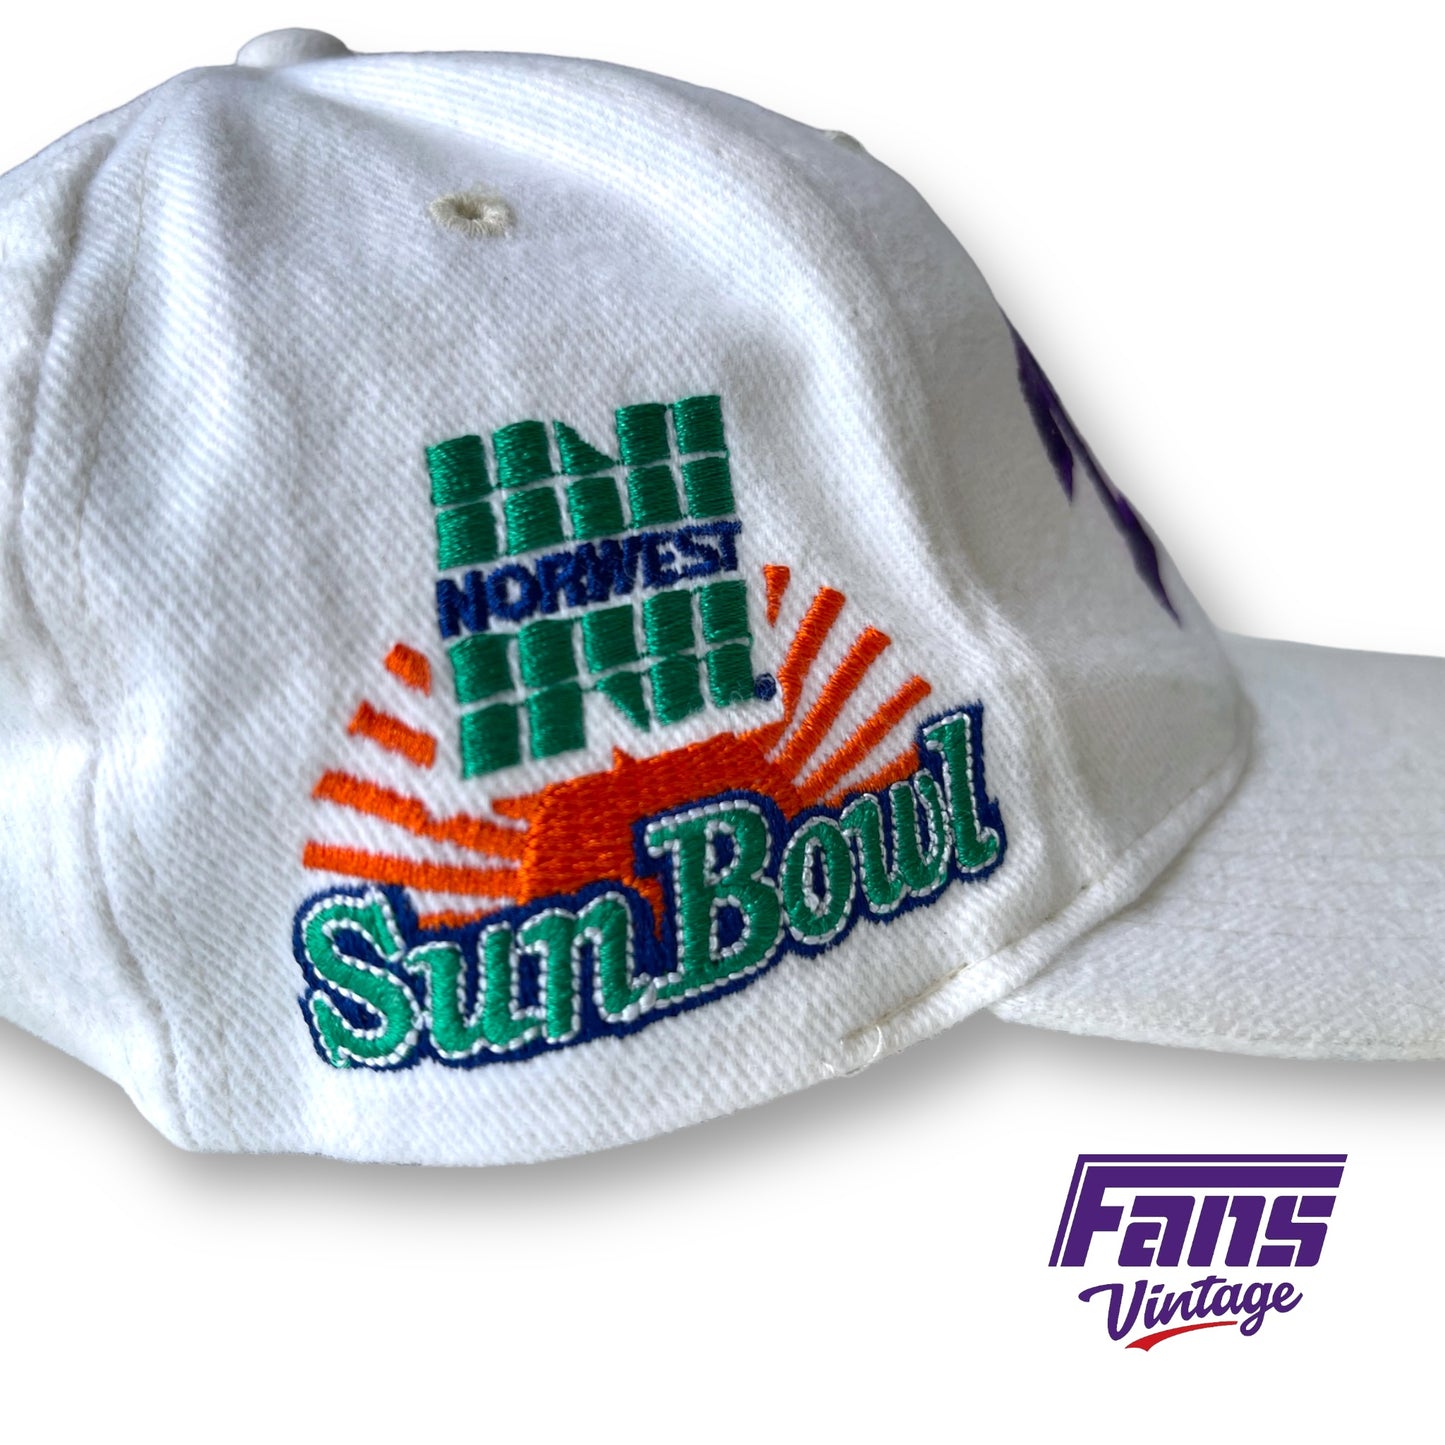 RARE - Vintage TCU Football 1998 Sun Bowl Hat - the game that changed everything!!